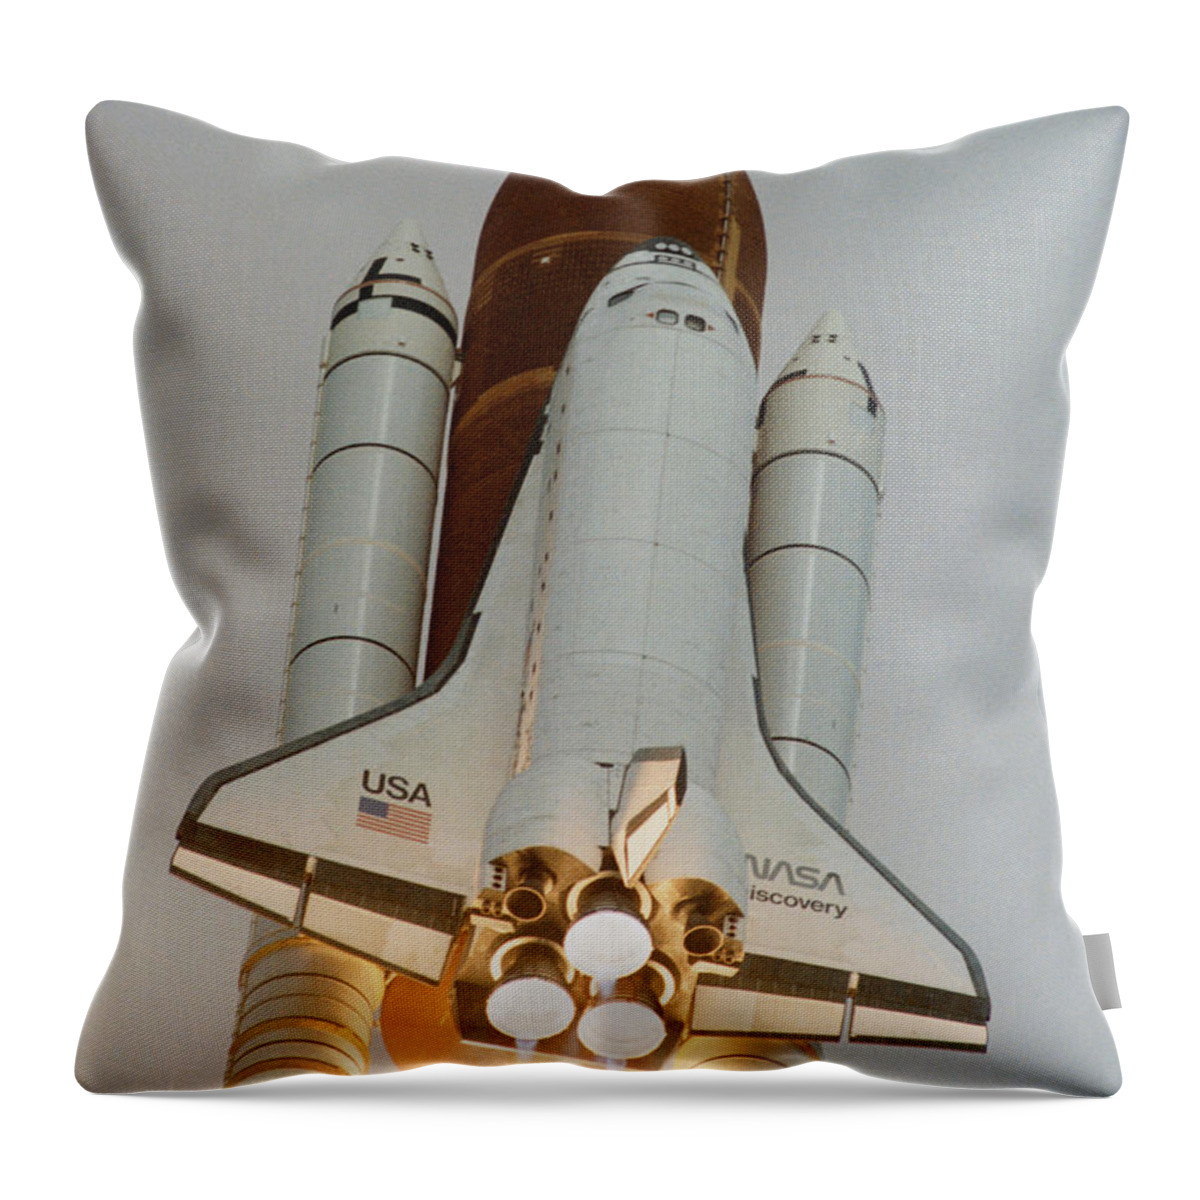 Hubble Space Telescope Throw Pillow featuring the photograph Launch of Shuttle STS-31 carrying Hubble by Nasa